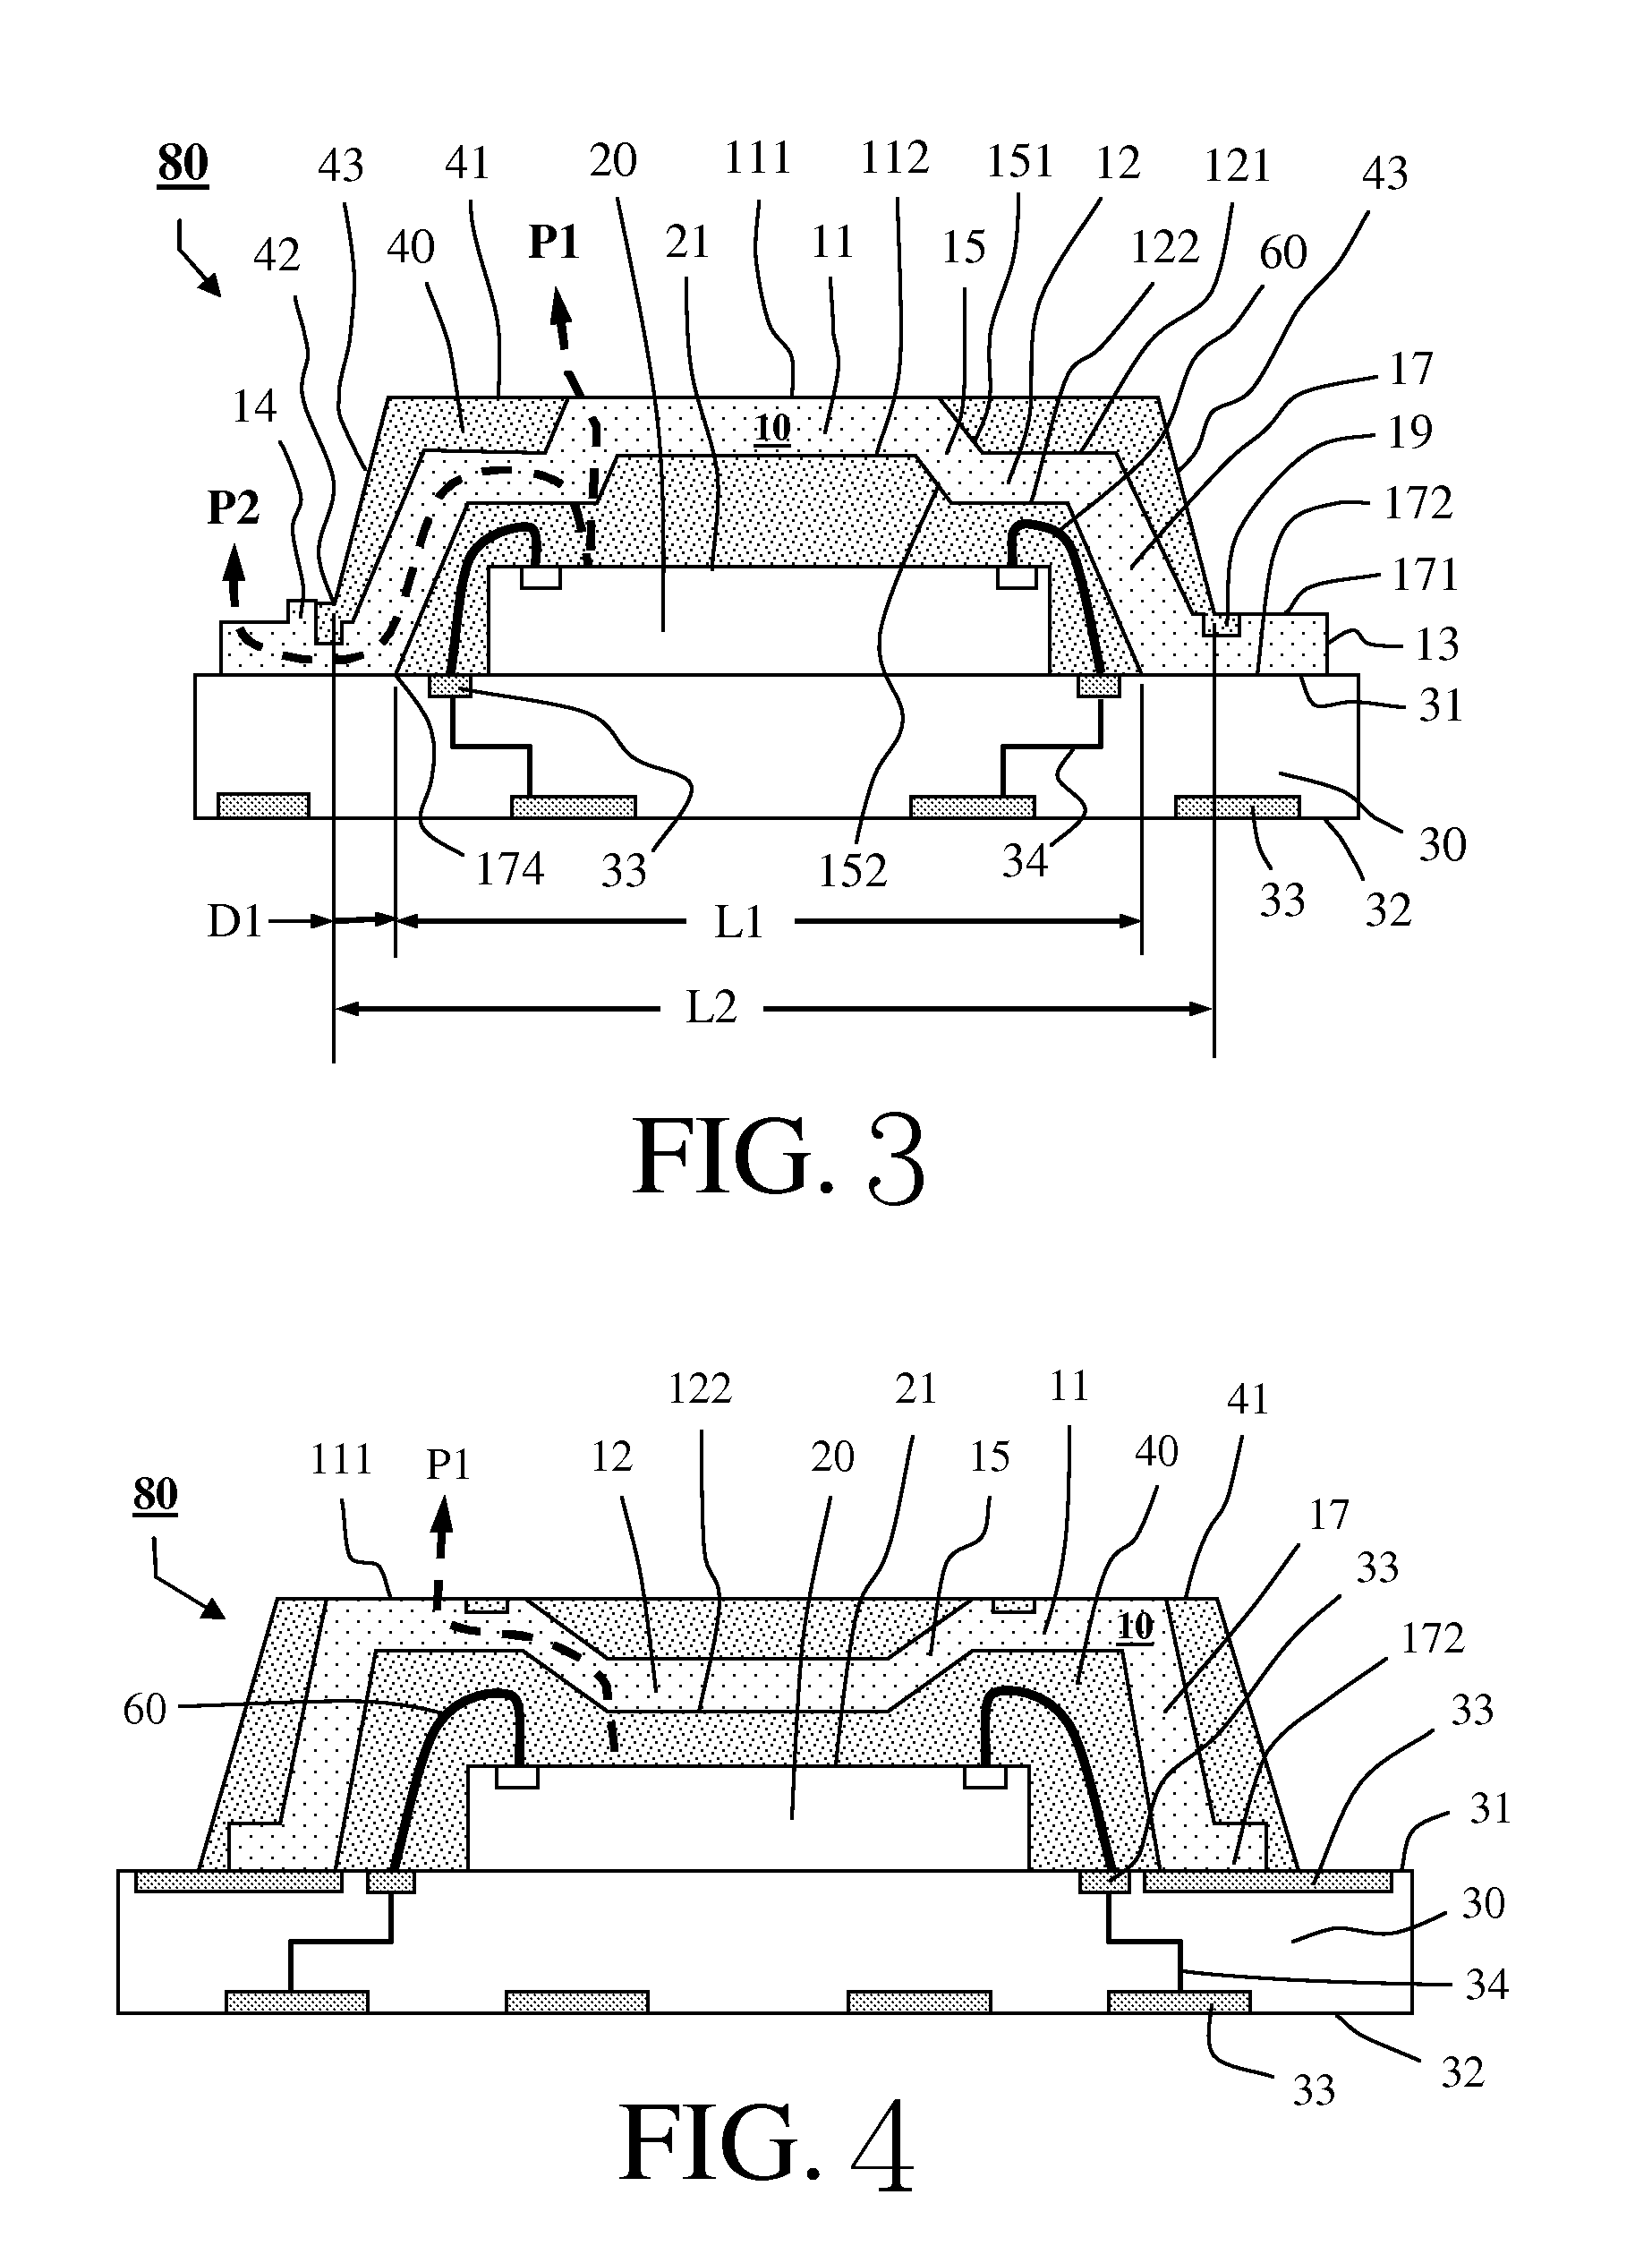 Heat spreader for an electrical device